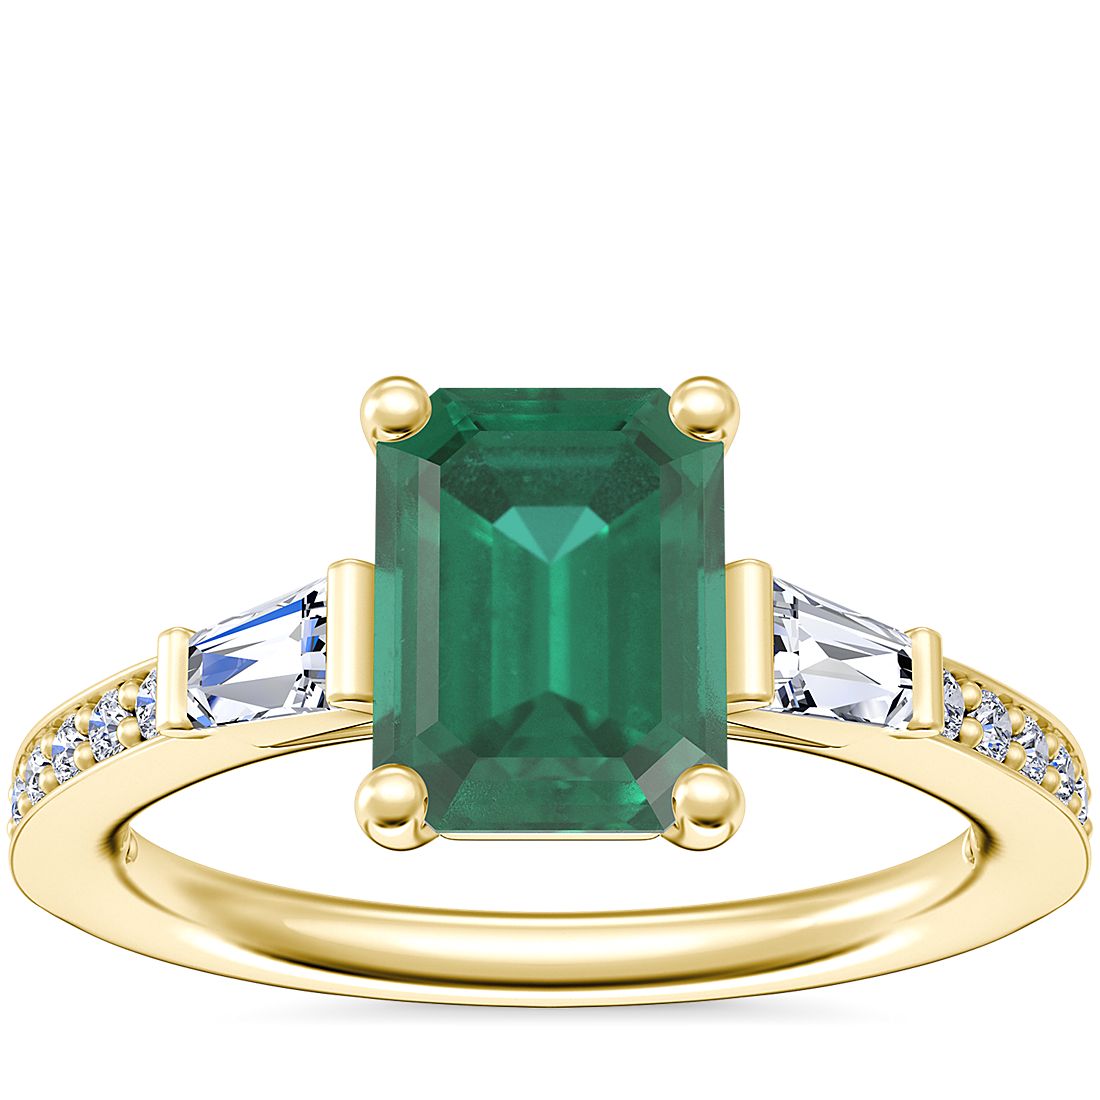 Tapered Baguette Diamond Cathedral Engagement Ring with Emerald-Cut Emerald in 14k Yellow Gold (8x6mm)